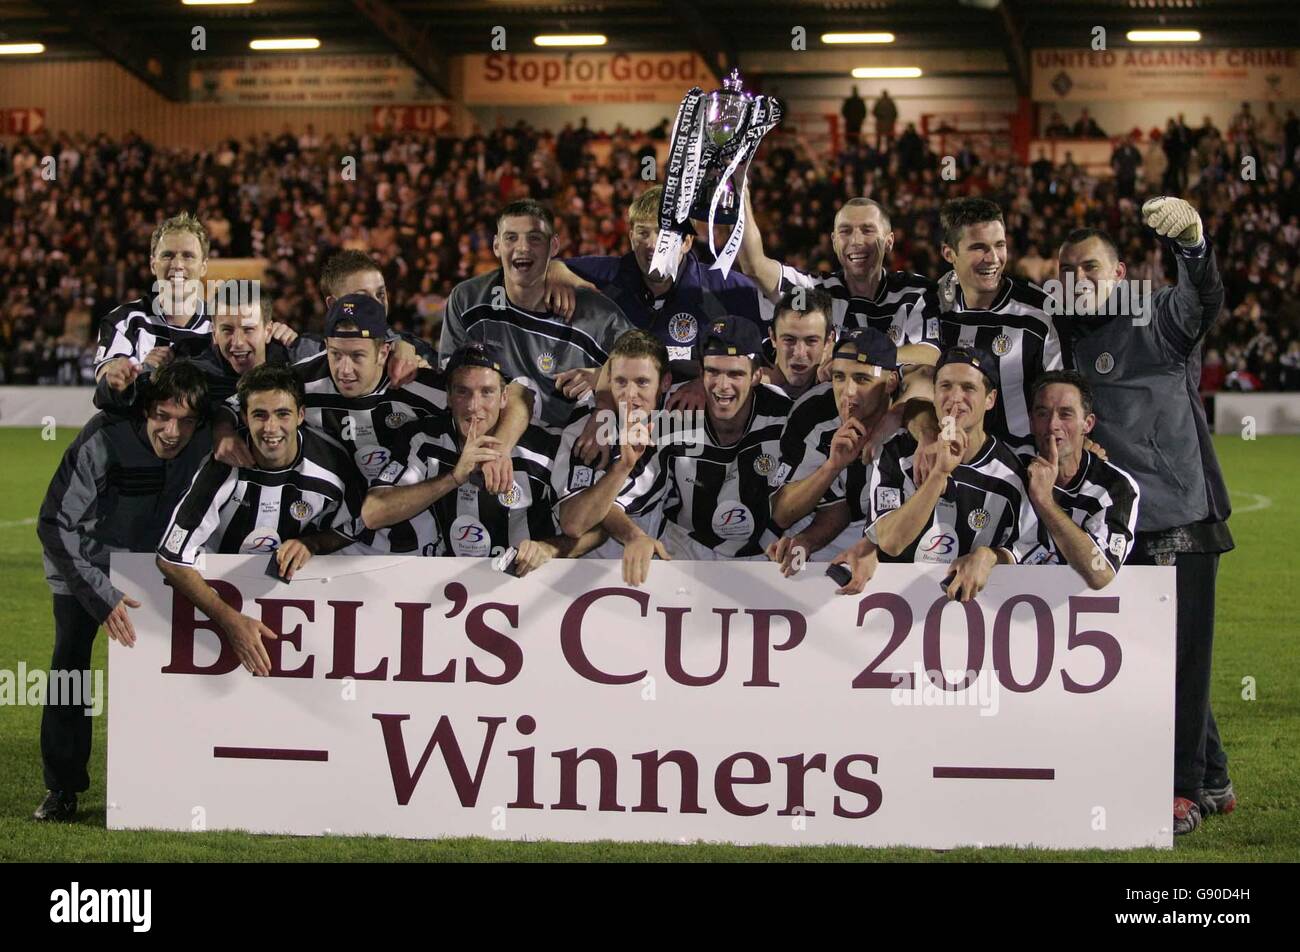 Soccer - Bell's Cup Final 2005 - St Mirren v Hamilton Academical - Excelsior Stadium - Airdrie Stock Photo